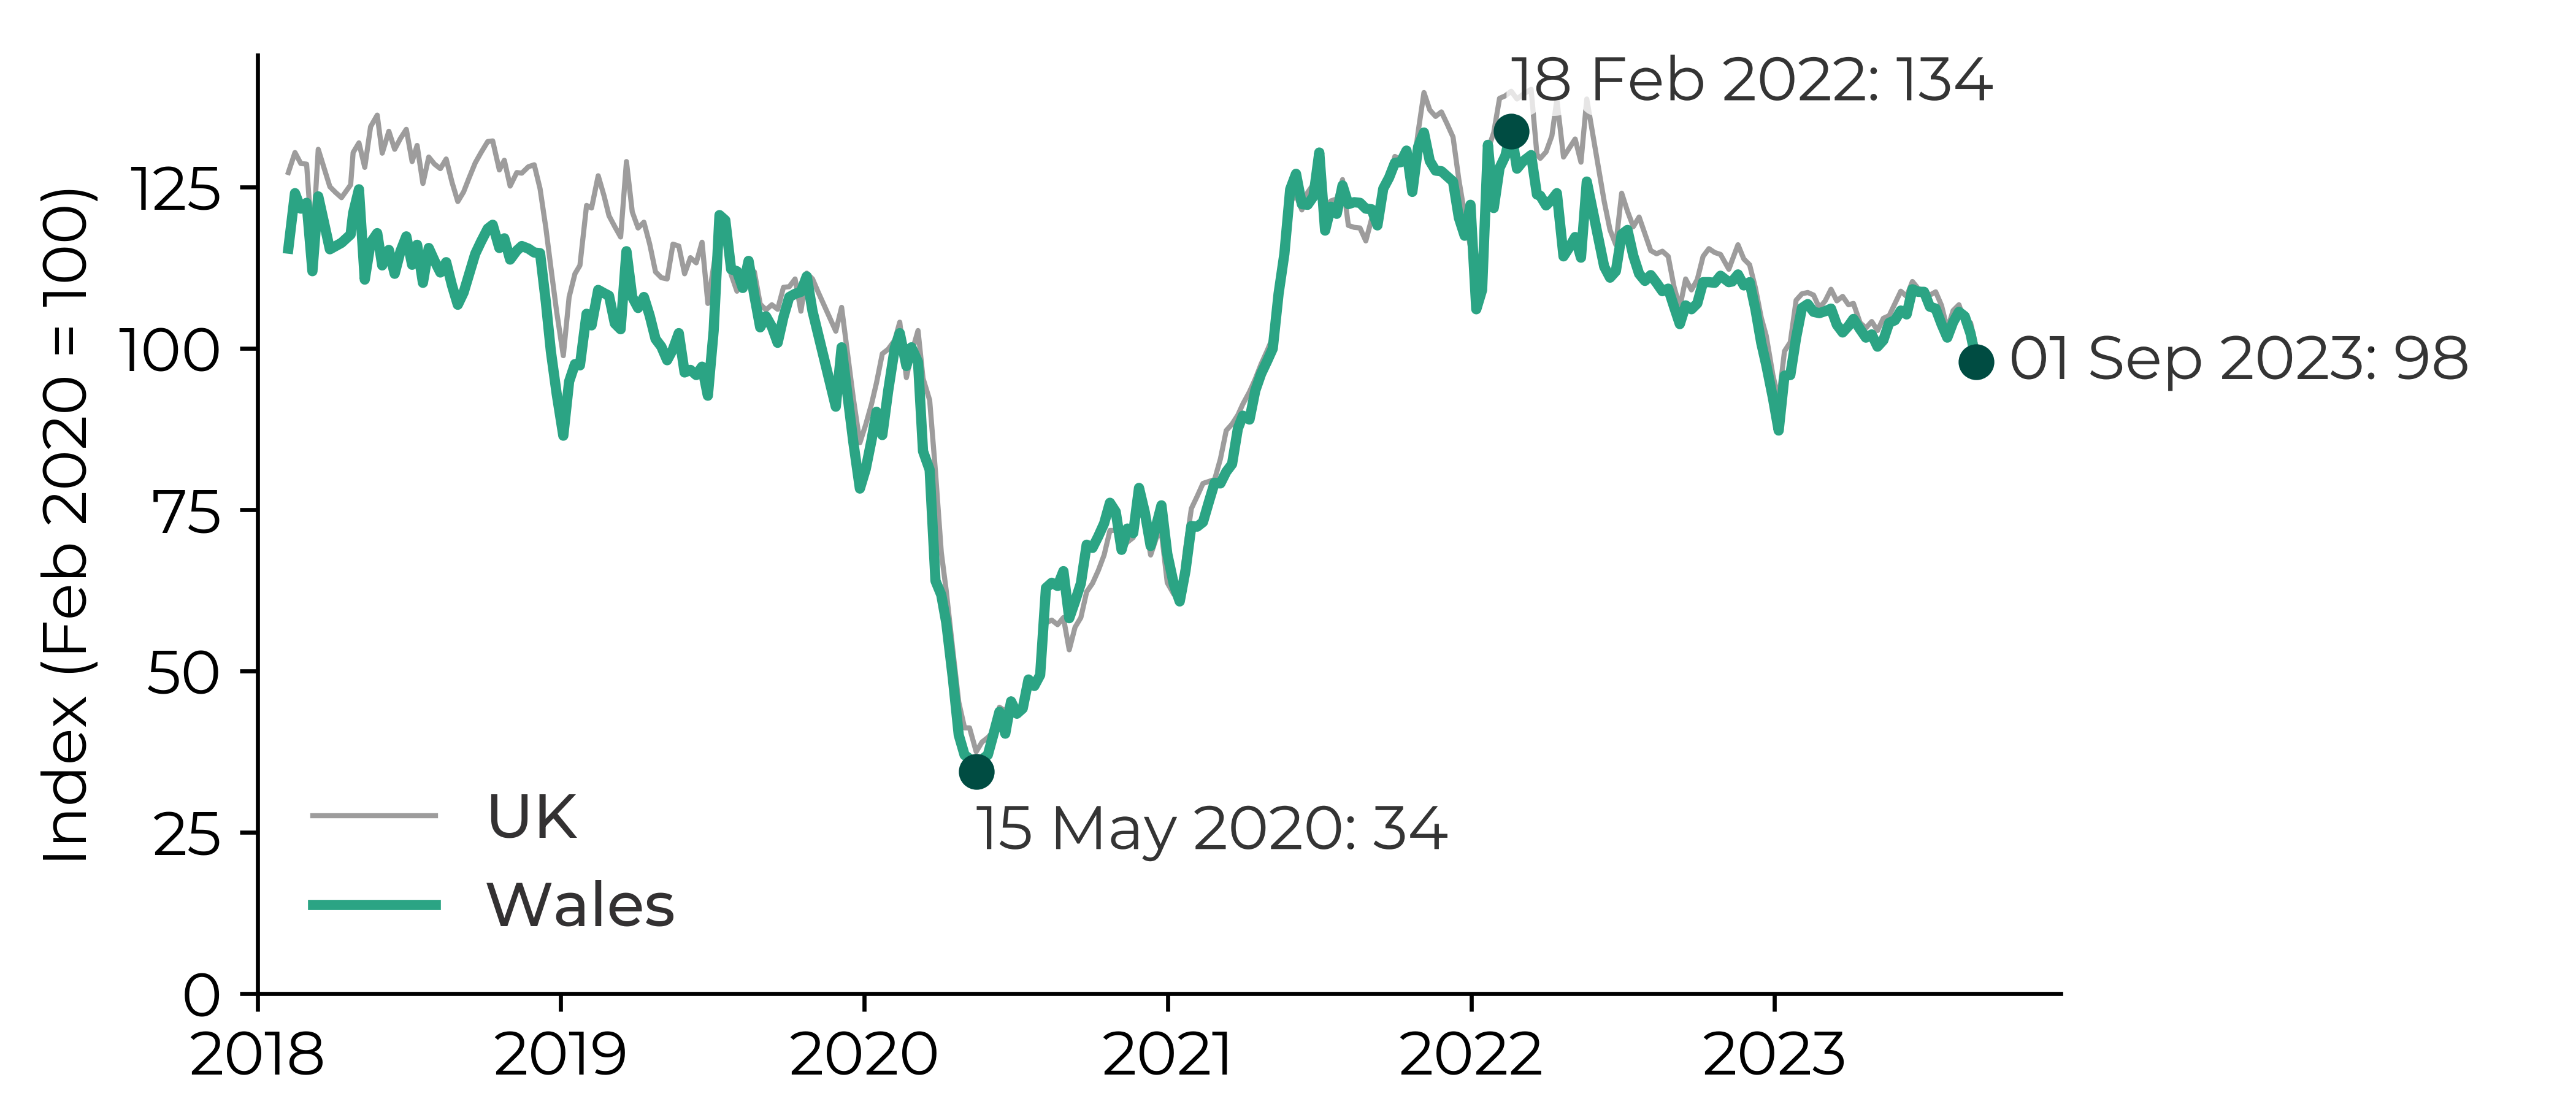 Graph showing that the index decreased from 100 in February 2020 to 34 in May 2020. The index increased to 134 by February 2022 and decreased to 98 by September 2023.